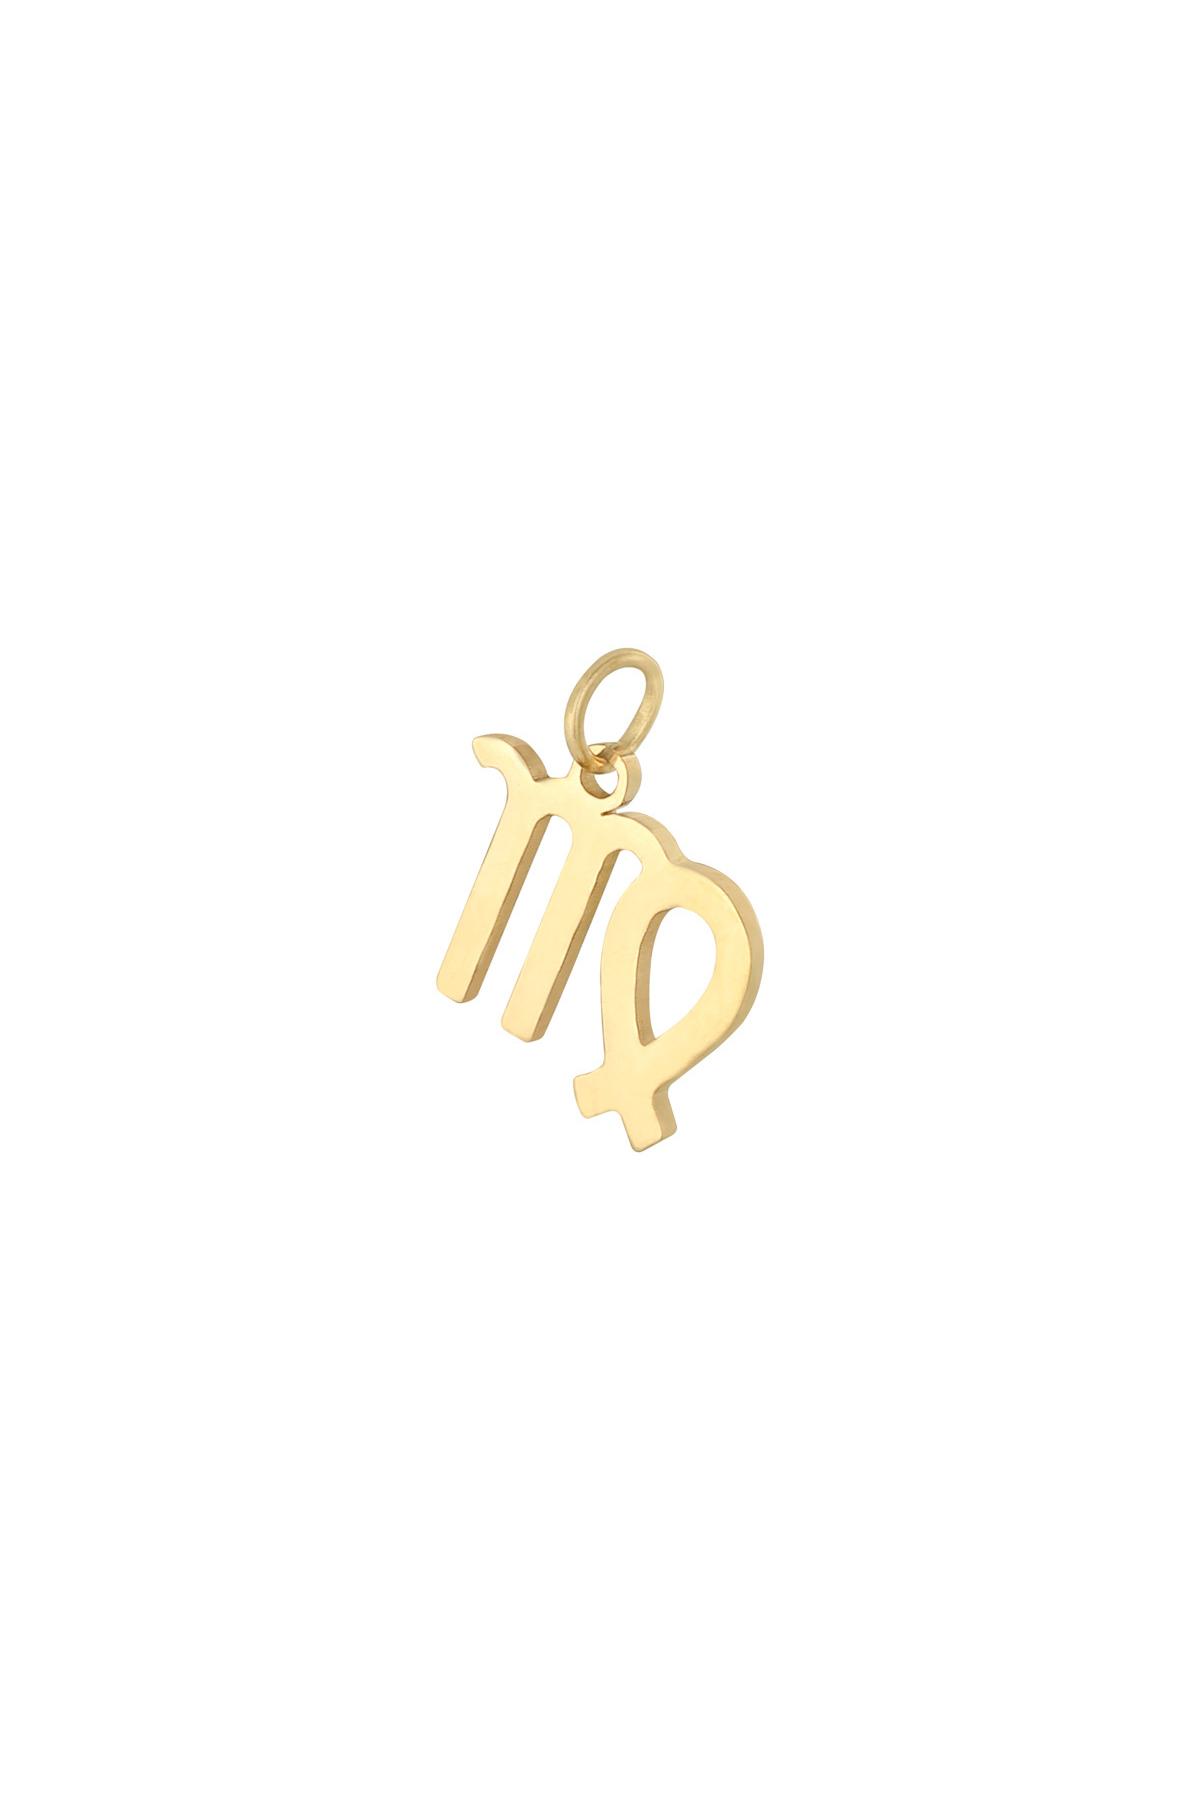 Gold / Charm Zodiac Virgo Gold Stainless Steel Picture23